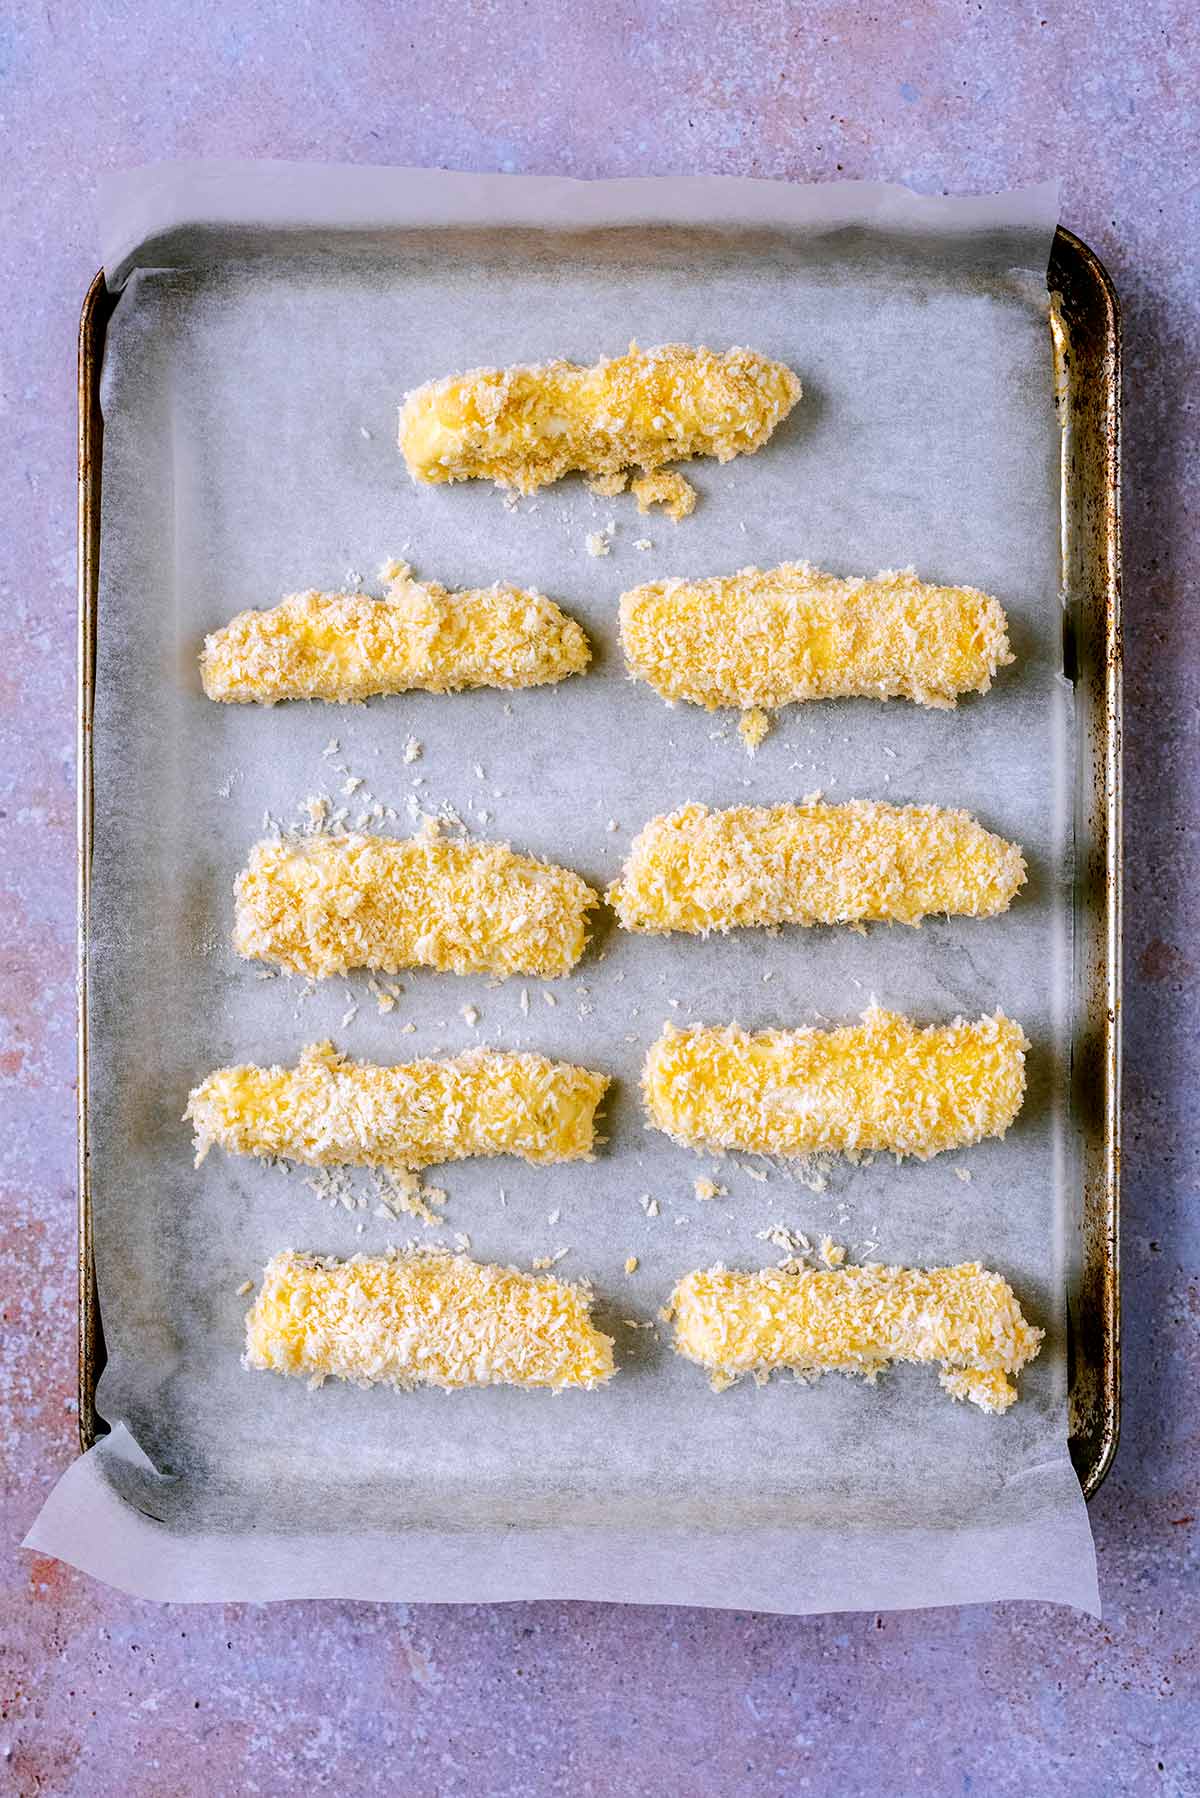 Uncooked halloumi fries on a lined baking tray.